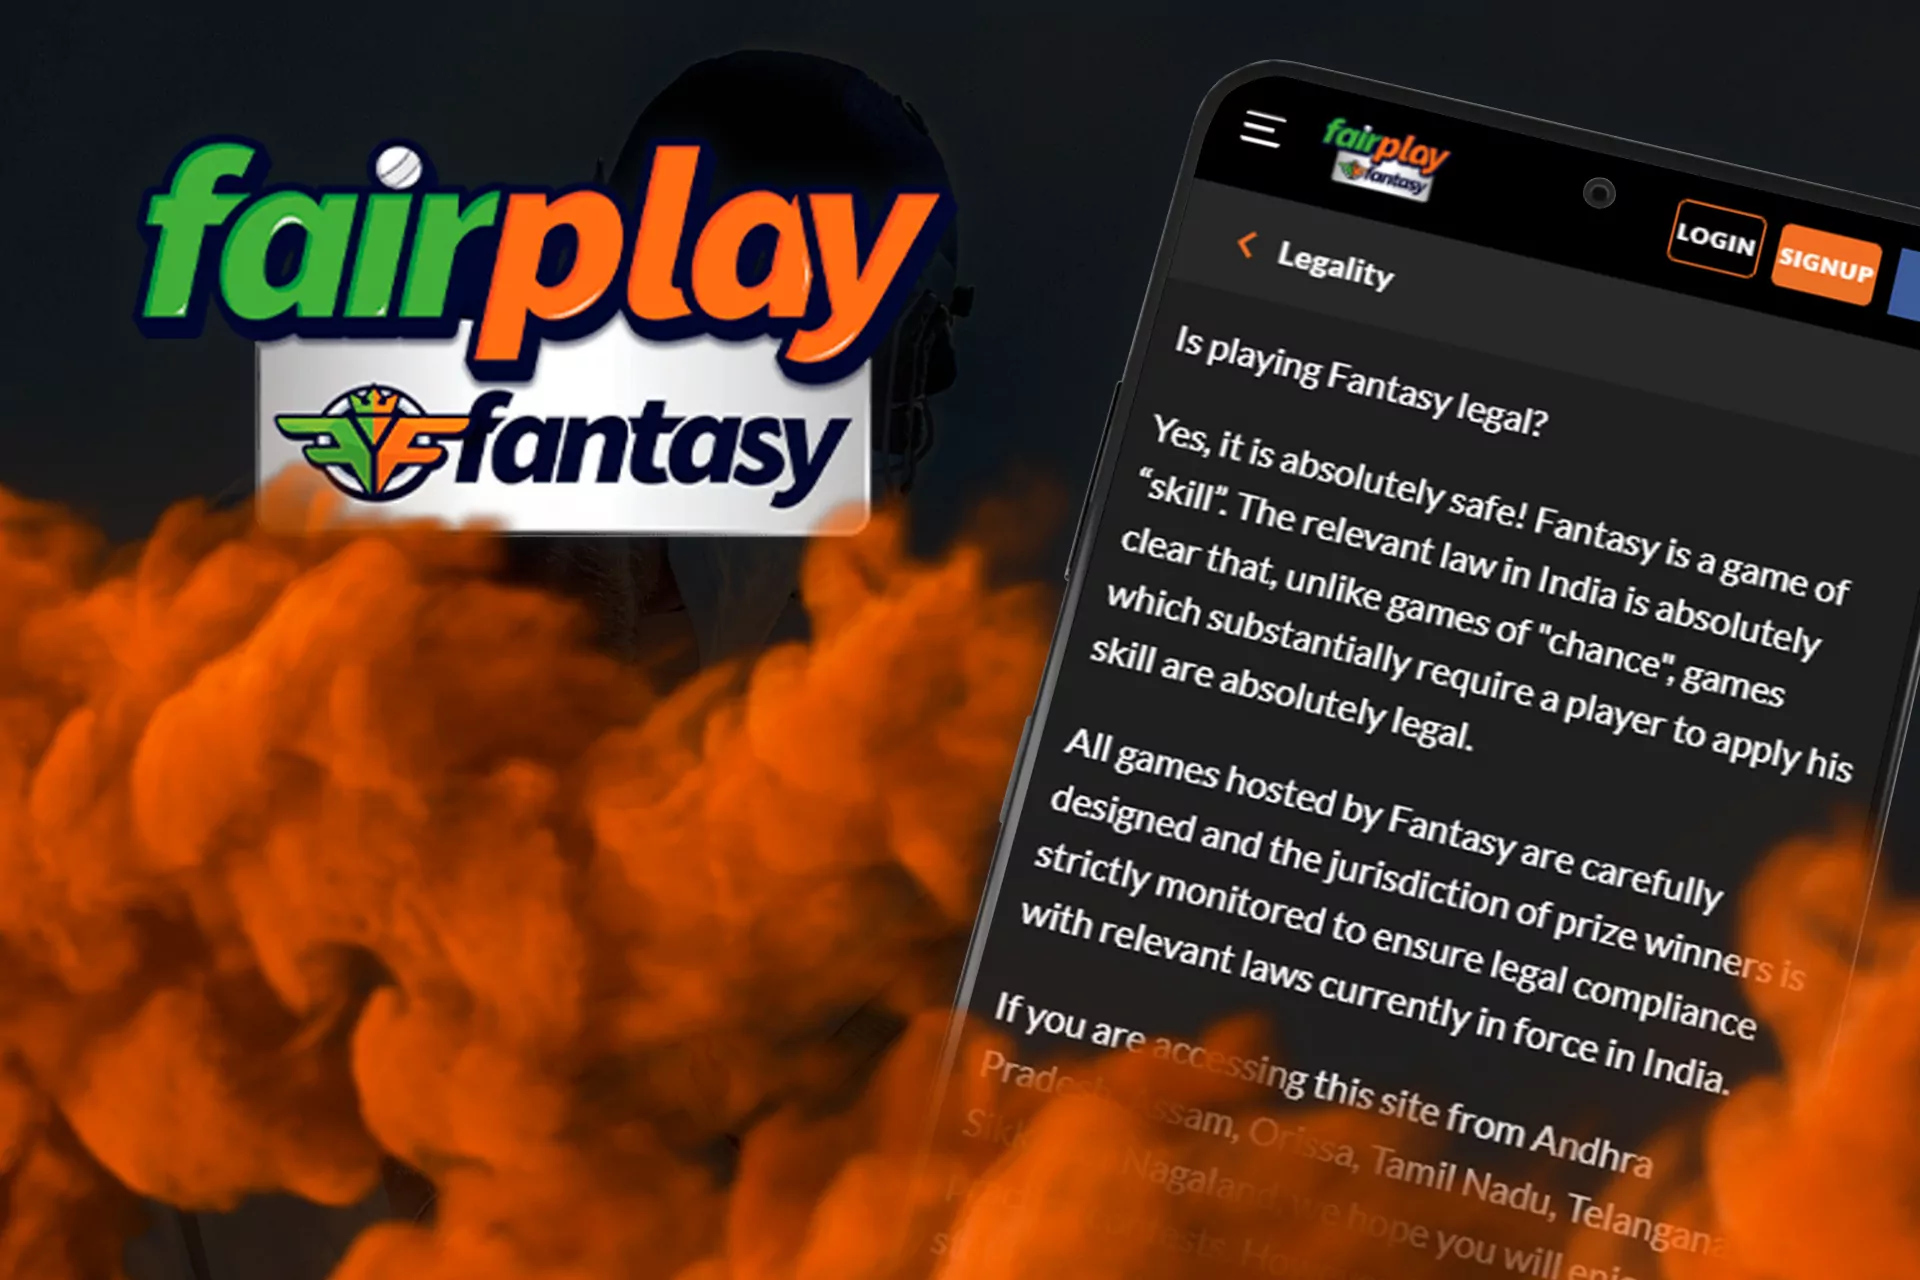 Fantasy sports by Fairplay are legal to play in India.